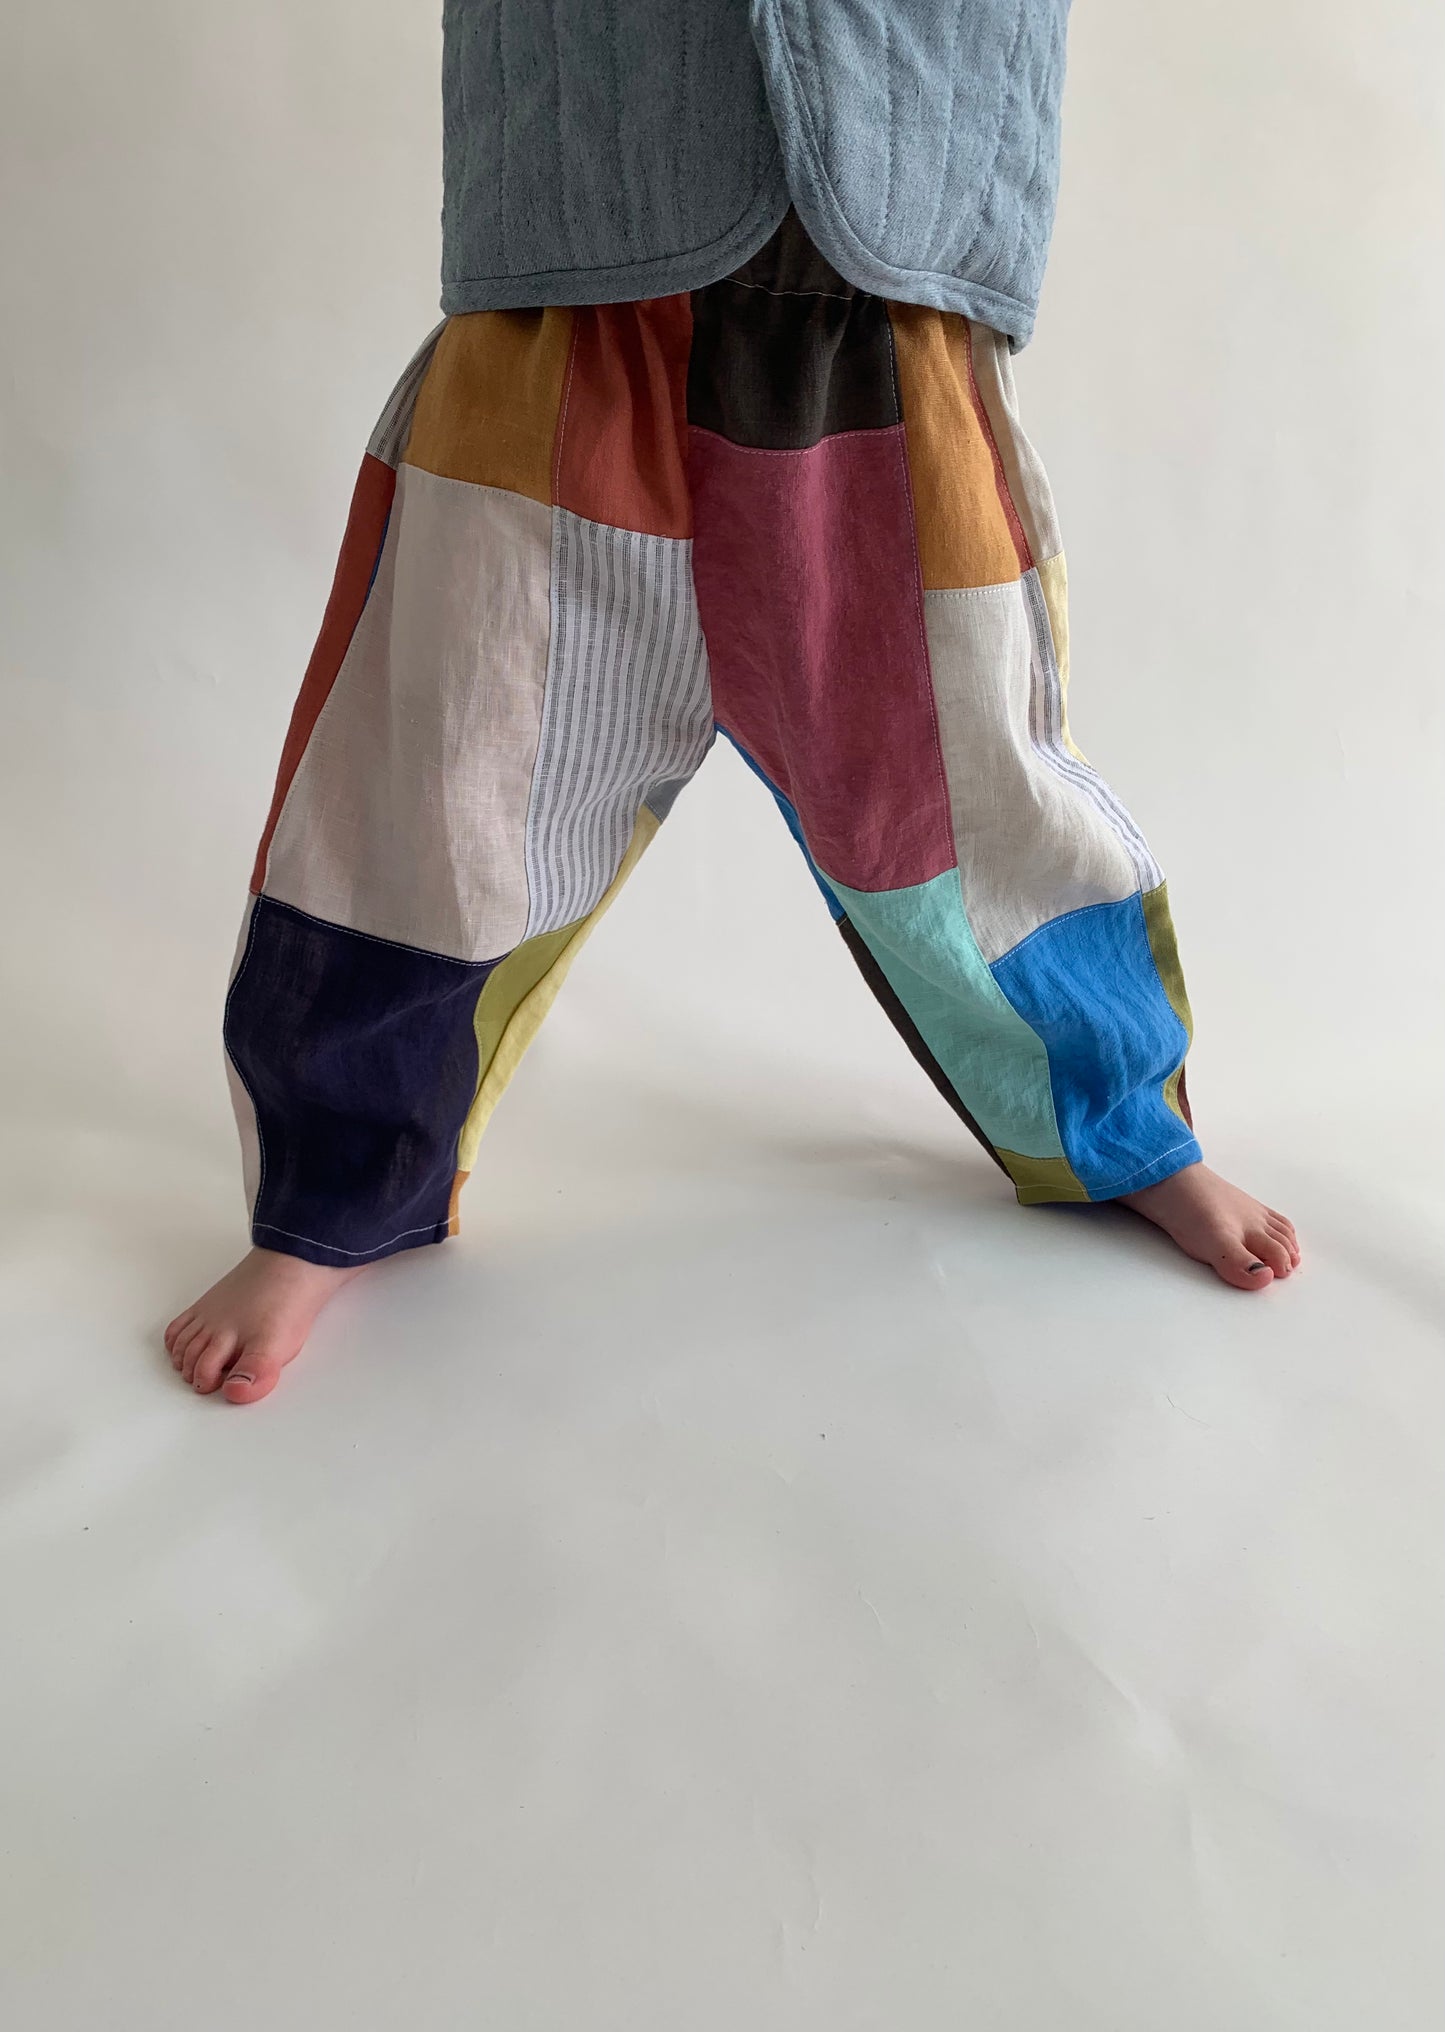 Unisex Child Linen Patchwork Pants/ One of a kind